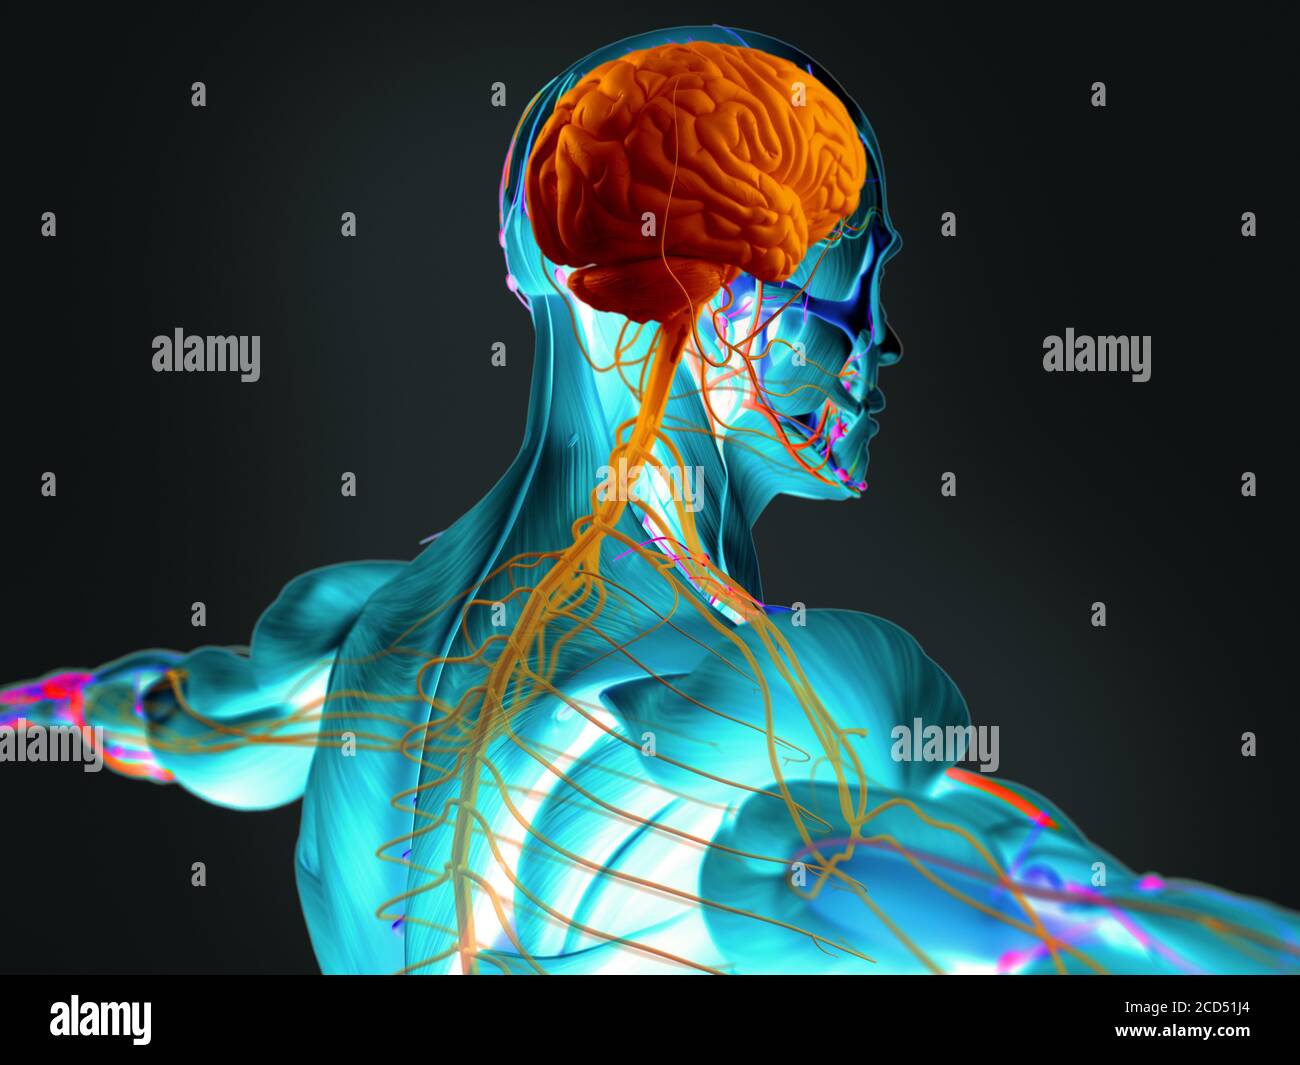 Human Anatomy 3d Futuristic Scan Technology With Xray Like View Of Human Body Back And Head And The Brain Vibrant Colors Xray Like Stock Photo Alamy